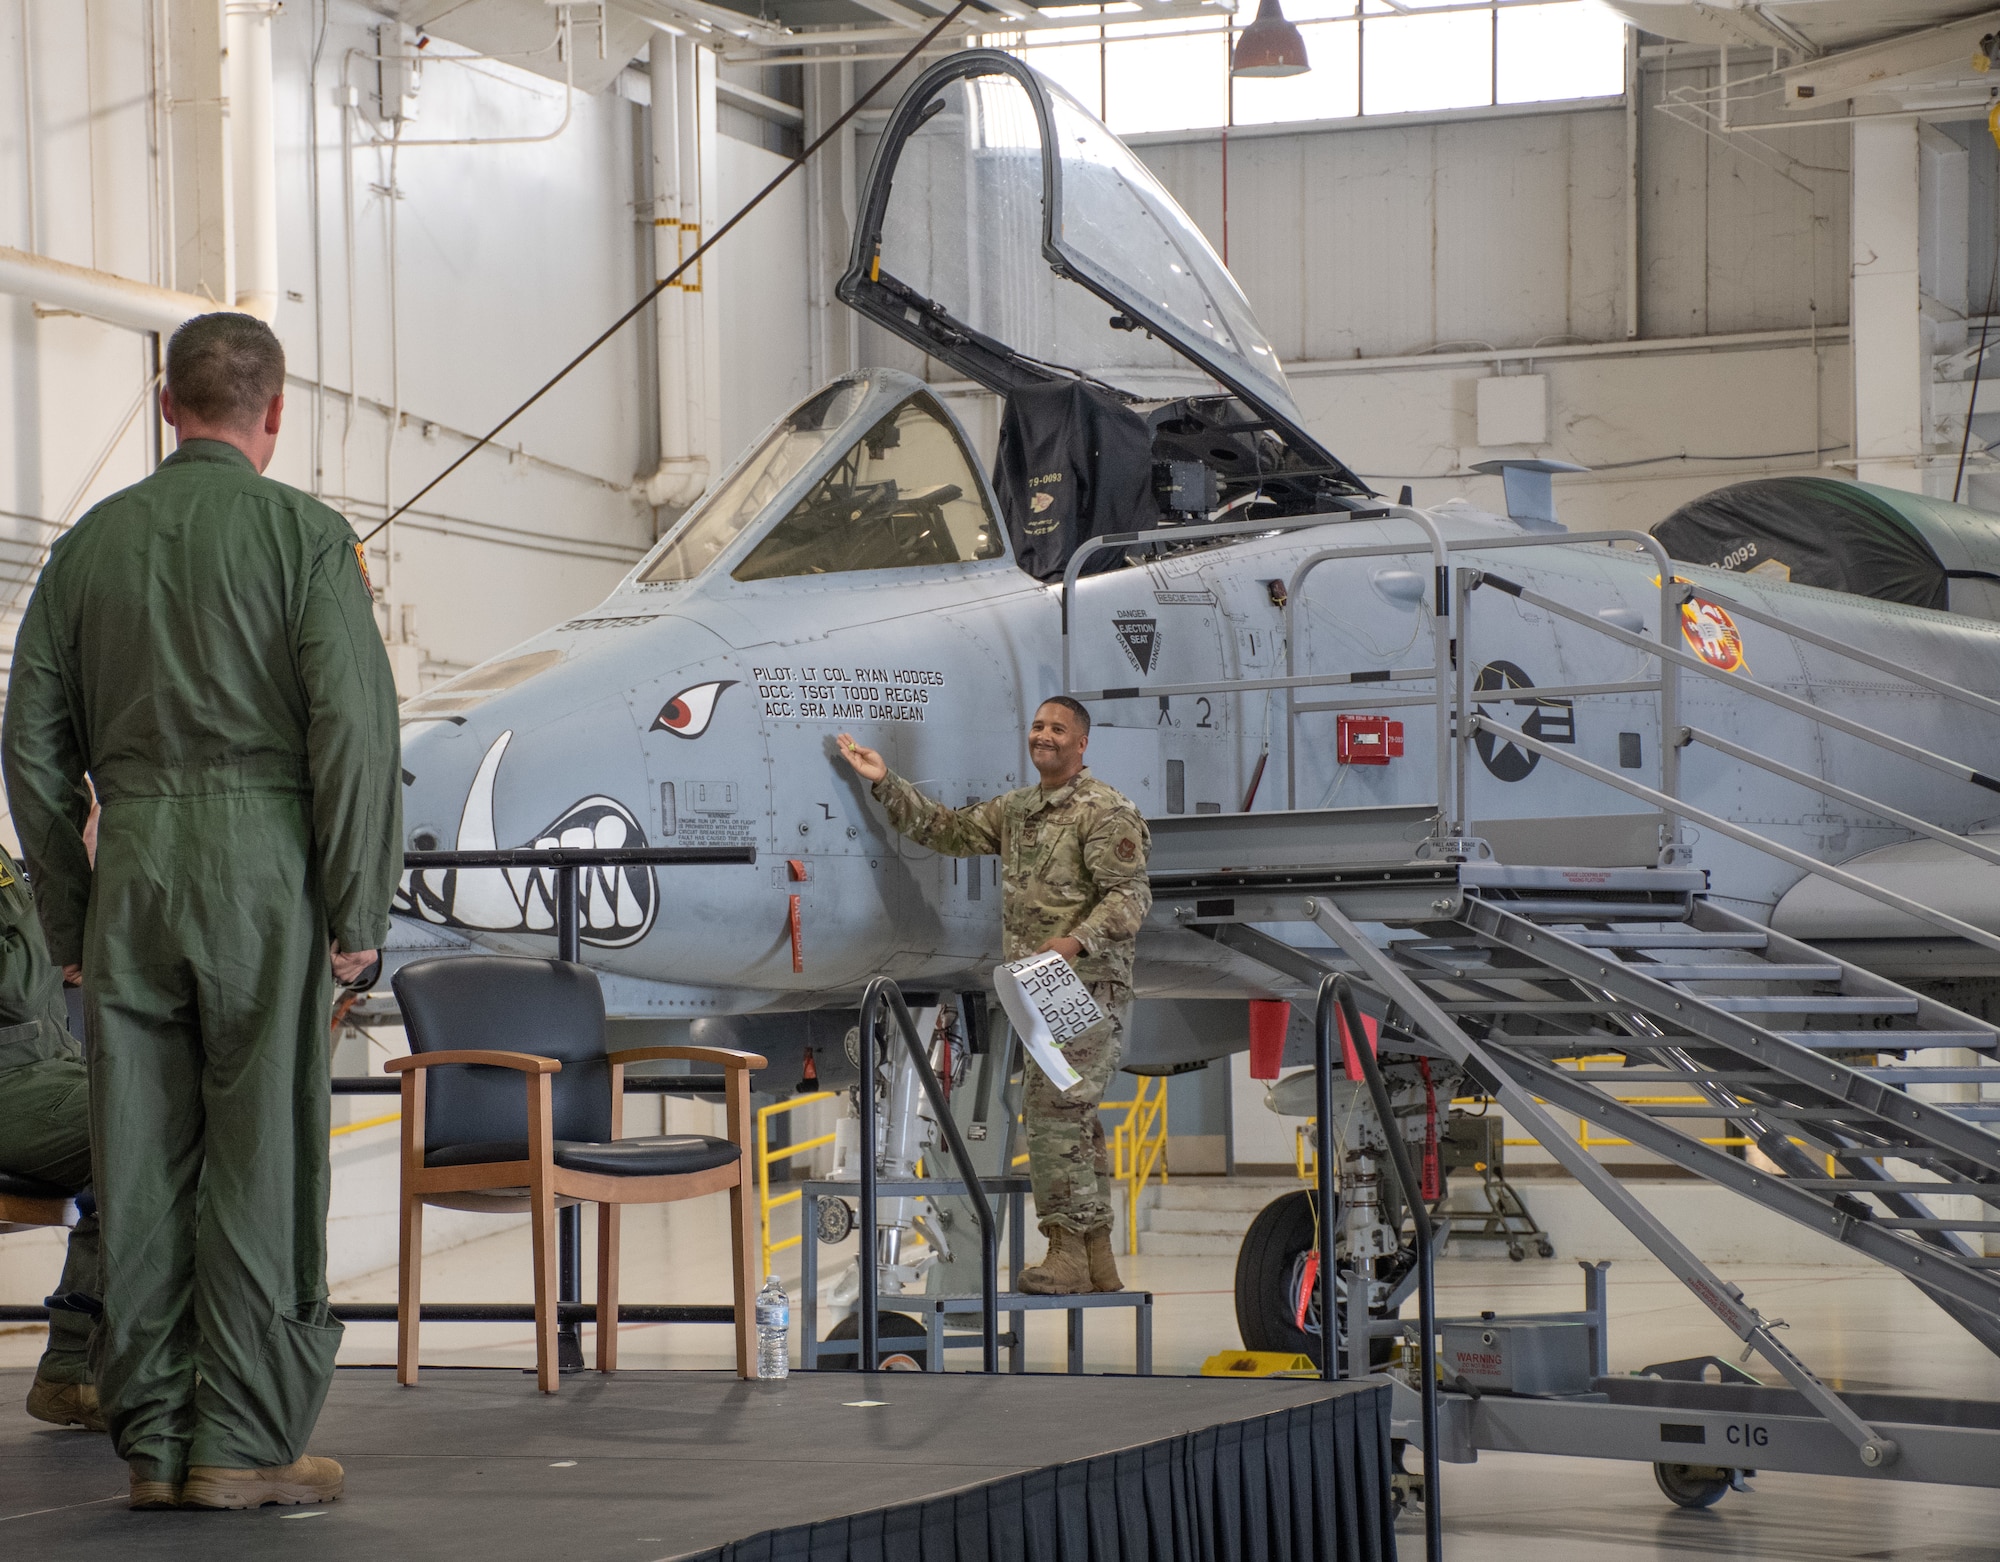 Tech. Sgt. Todd Regas, the dedicated crew chief of aircraft 79-093, unveils Lt. Col. Ryan Hodges’ name on his A-10C Thunderbolt II aircraft during the change of command ceremony on Aug. 7, 2021, at Whiteman Air Force Base, Mo. (U.S. Air Force photo by Maj. Shelley Ecklebe)